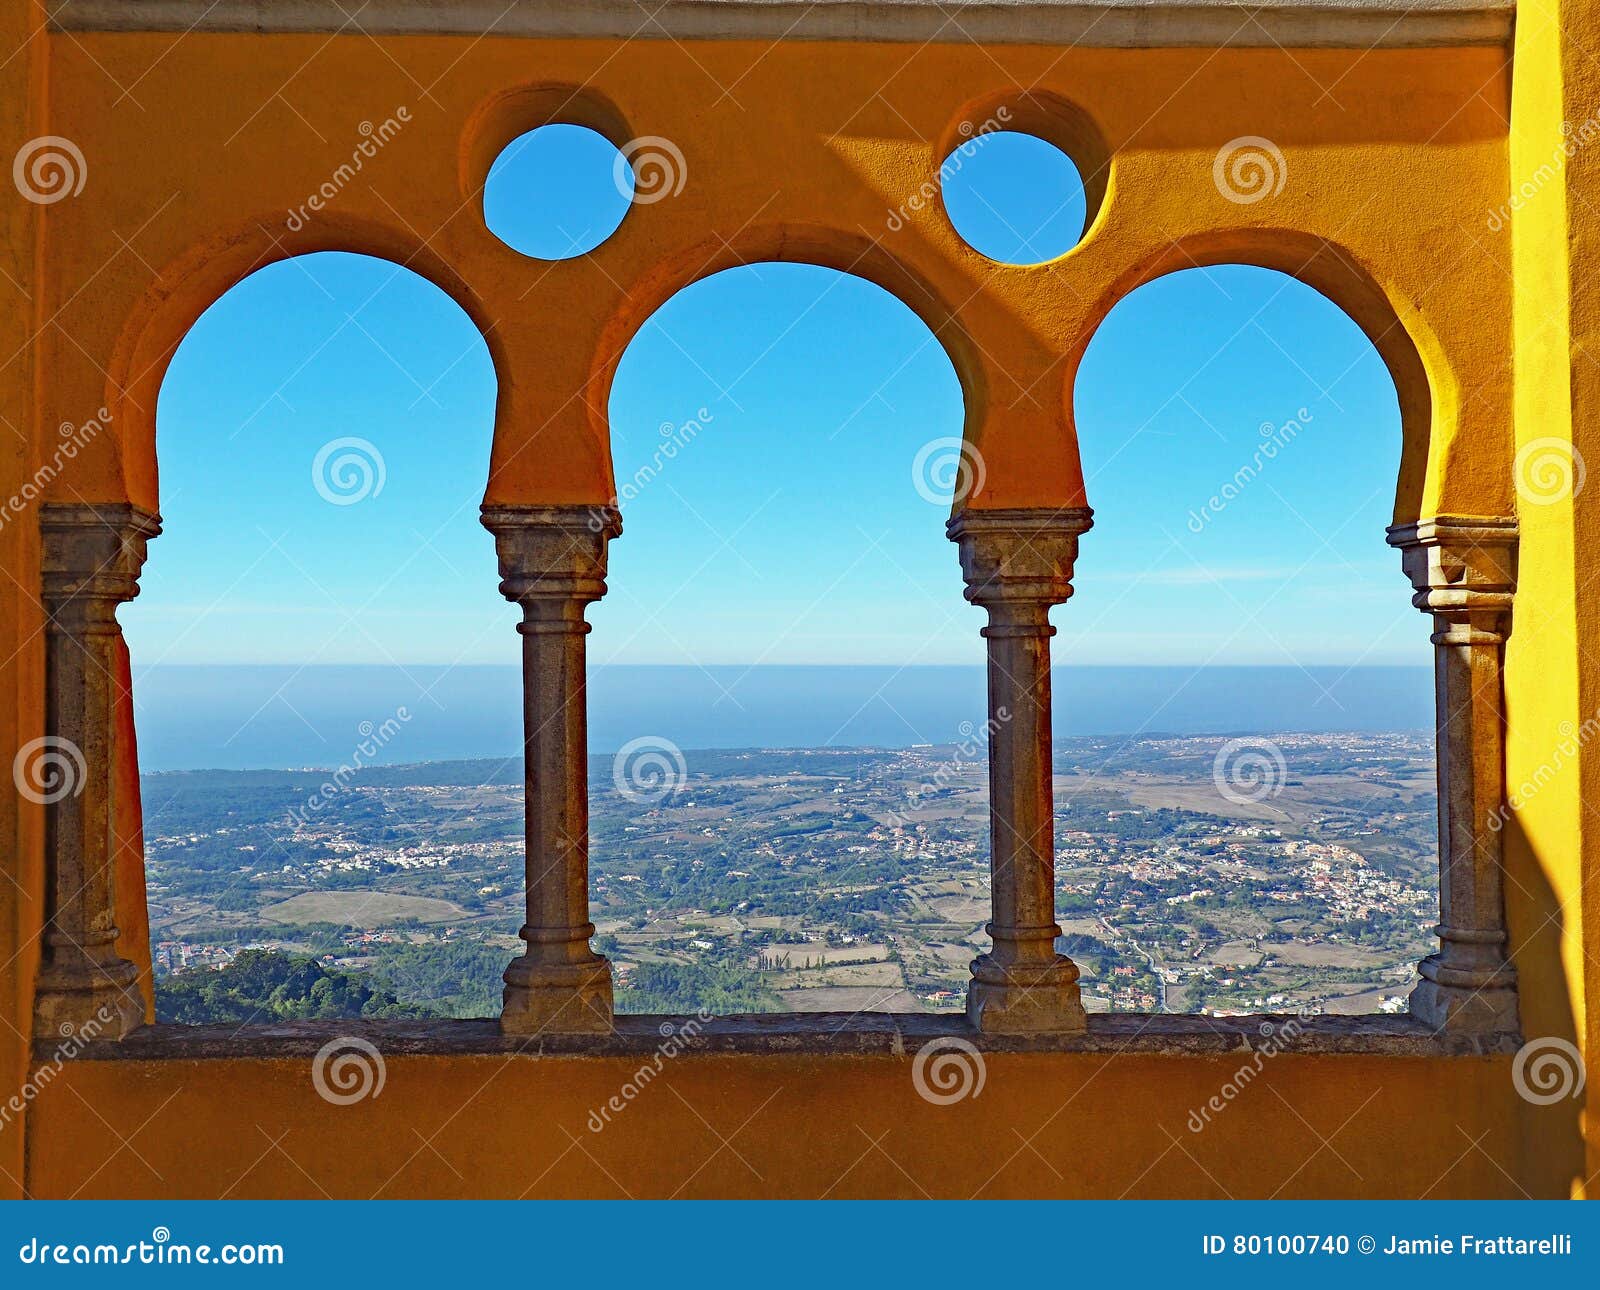 ocean view from pena palace, sintra, portugal